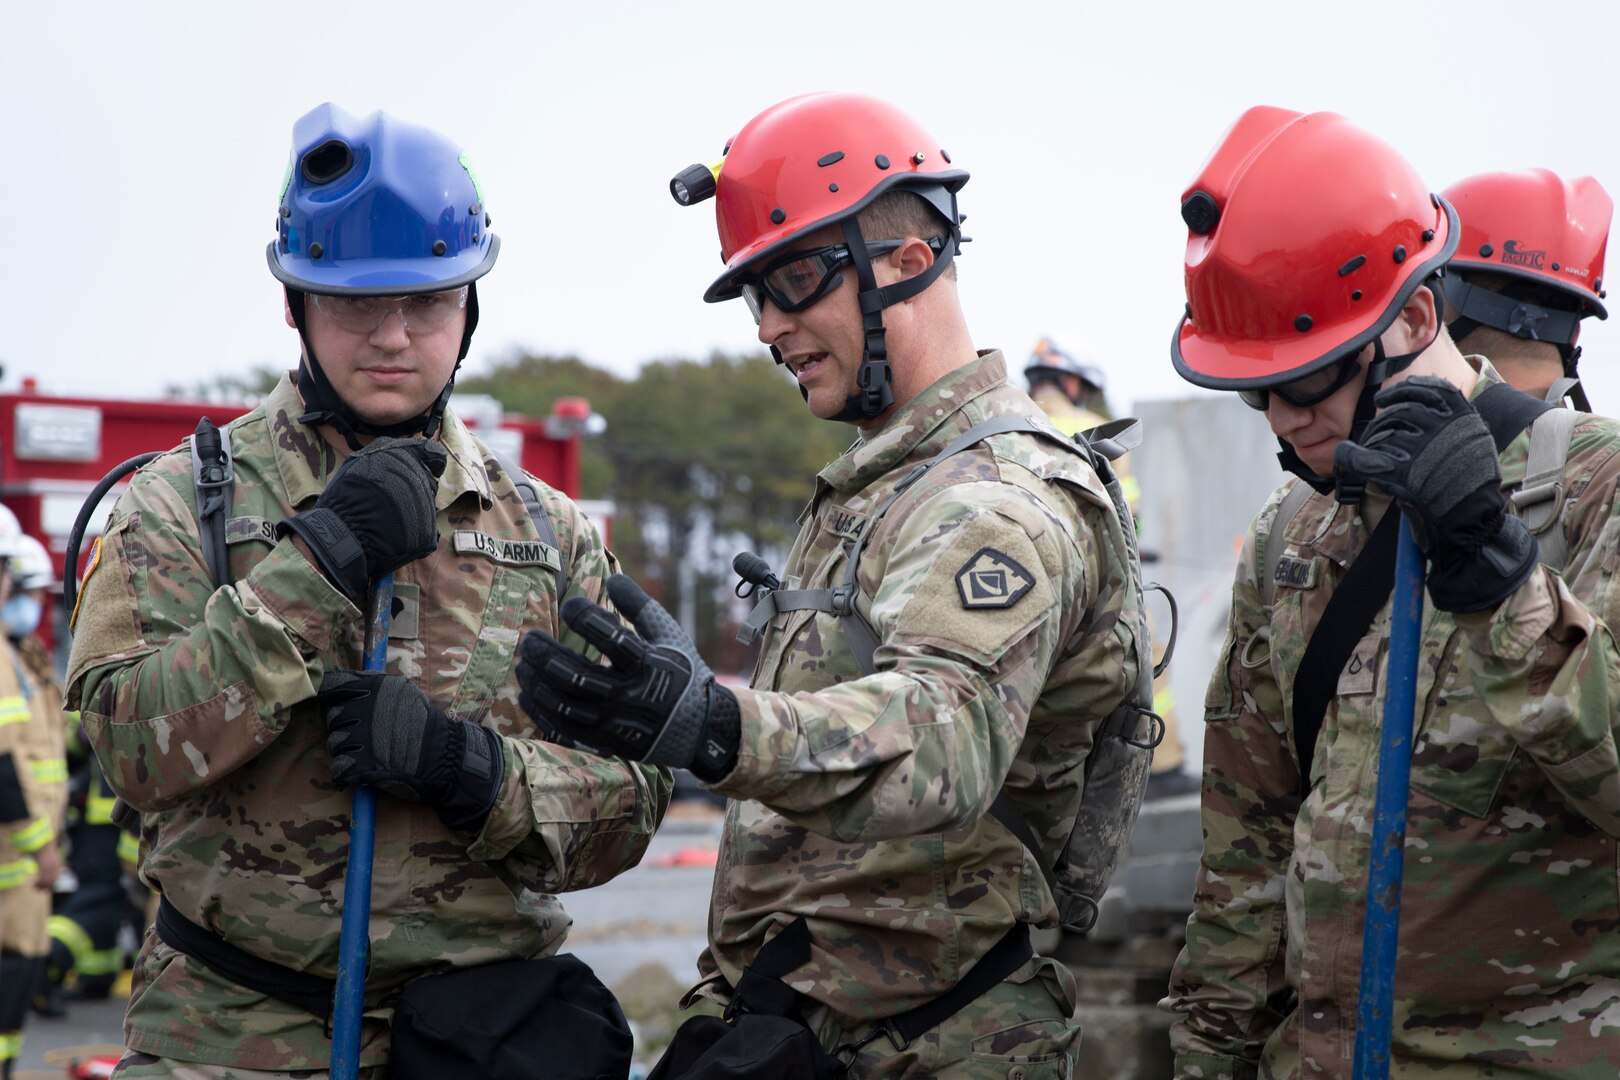 West Virginia National Guard’s 35th Chemical, Biological, Radiological, Nuclear, and High Yield Explosive (CBRNE) Enhanced Response Force Package (CERFP) search and extraction team members participate in a rescue scenario during a Vigilant Guard Massachusetts exercise at Joint Base Cape Cod Nov. 6, 2018. The Massachusetts National Guard hosted Vigilant Guard 19-1, a full-scale civil-military exercise, with 46 federal, state, local and civilian organizations, Nov. 5-9, 2018, in various locations throughout the Commonwealth of Massachusetts. (U.S. Army National Guard photo by Sgt. Zoe Morris)